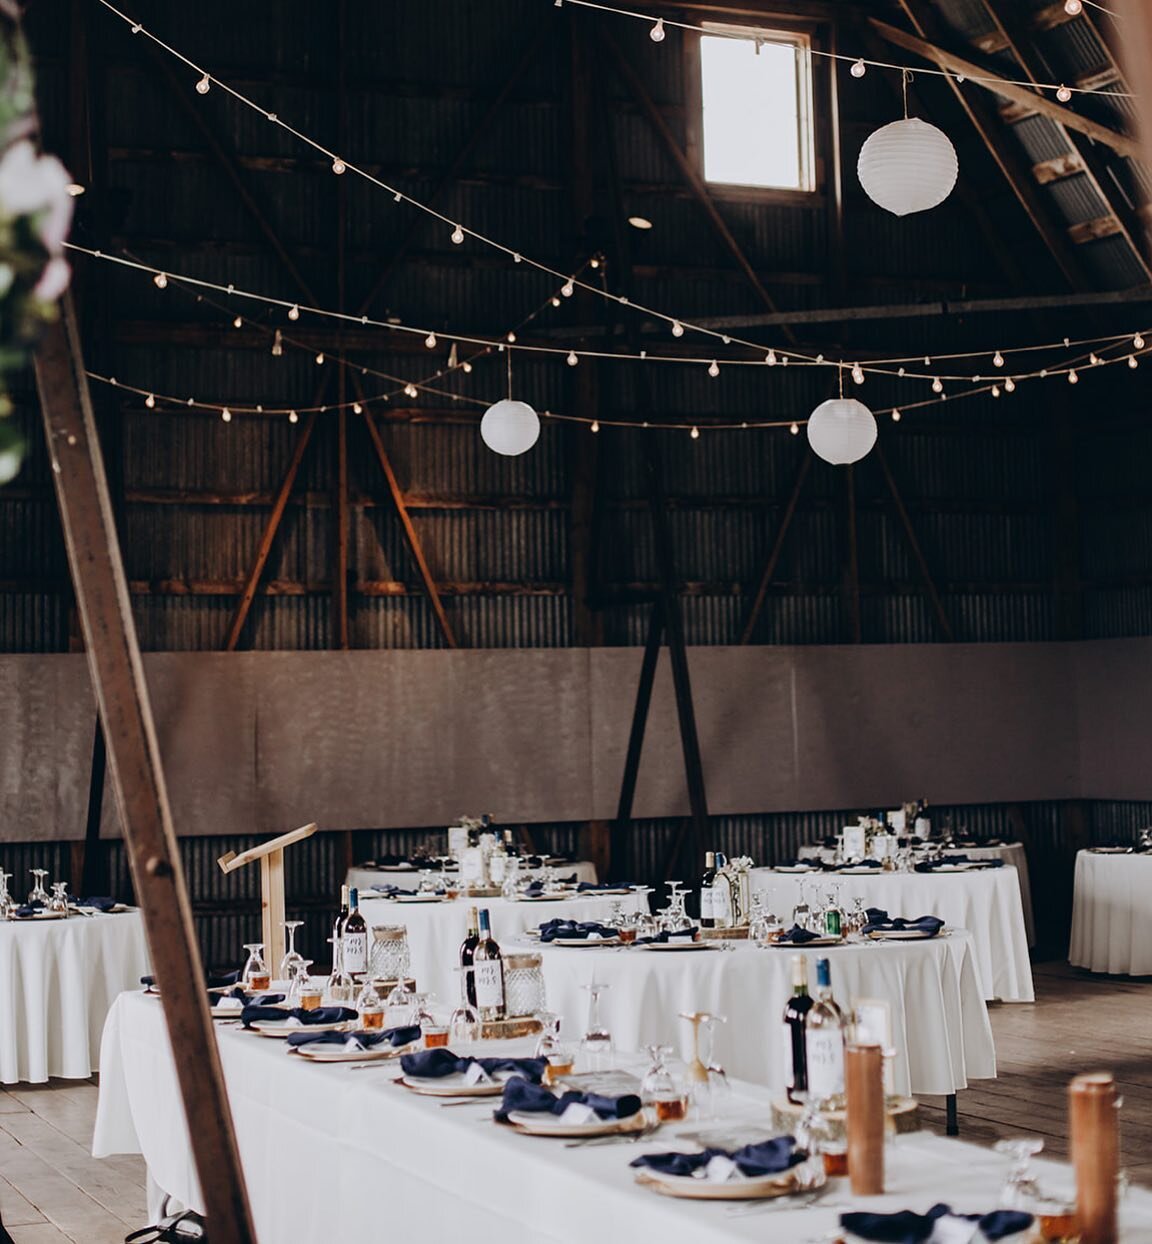 Happy Friday! This beautiful decor has us swooning! 

When you book with us, the grounds and facilities are yours to decorate and personalize. We provide the canvas, you bring the paint!

Looking for a unique, picturesque venue to host your wedding? 